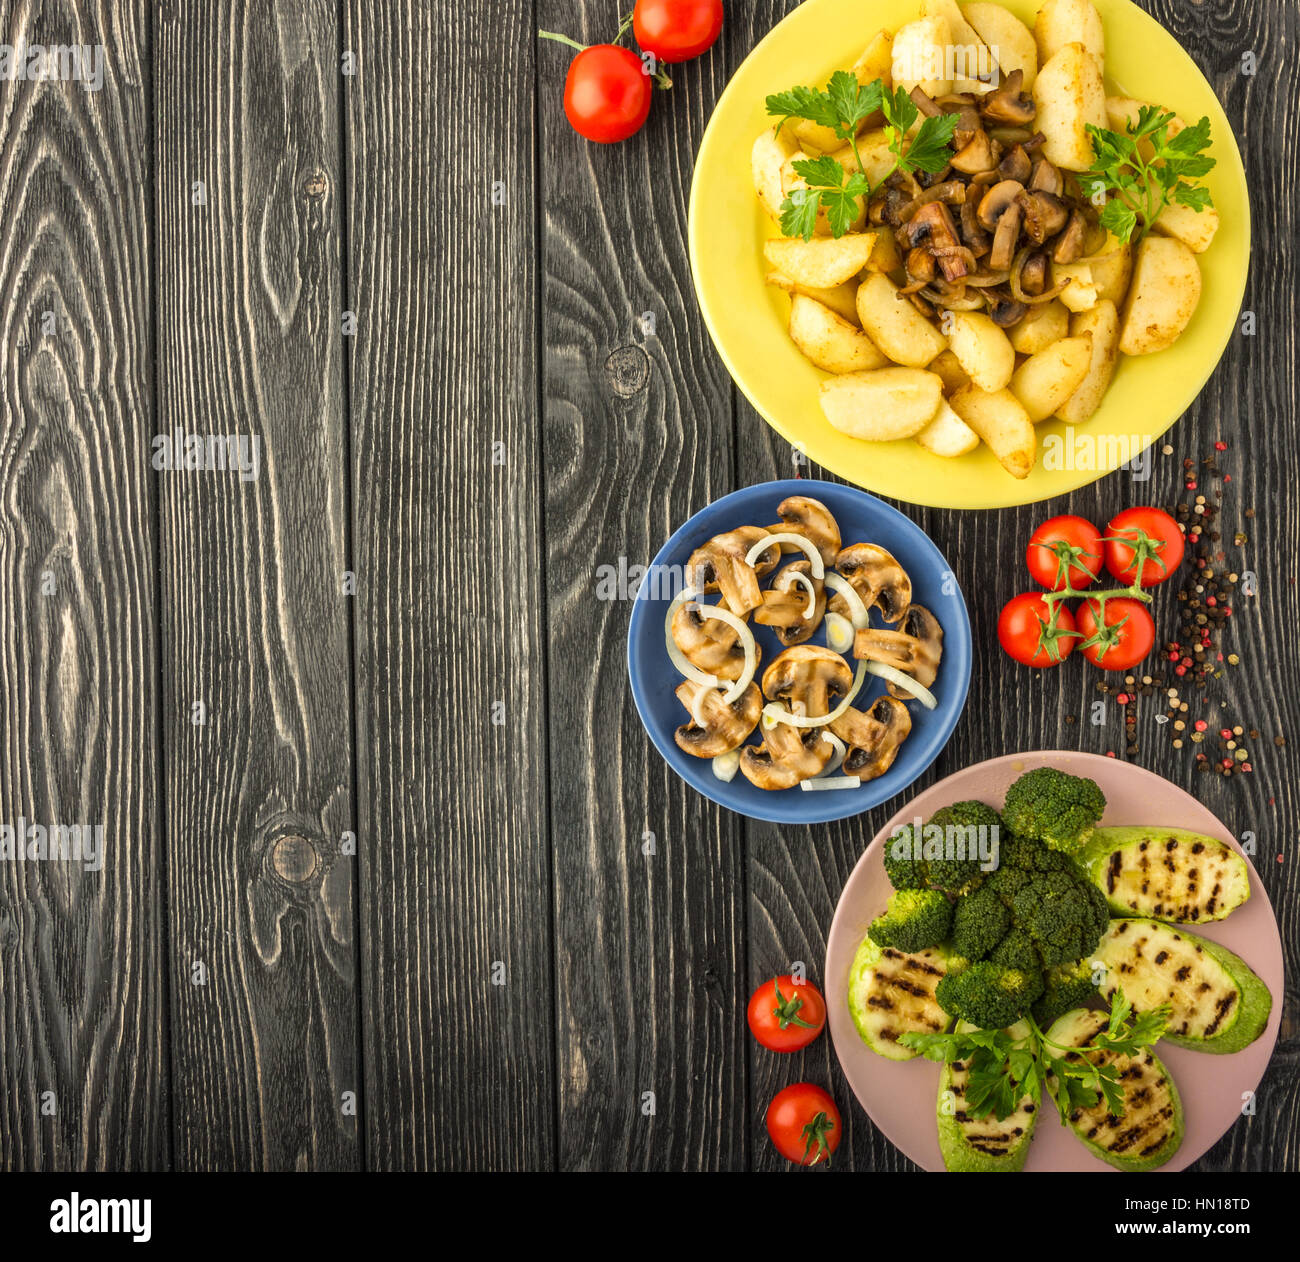 Diet vegetables grilled on a dark wooden table. Tasty, healthy, rich in vitamins and minerals: potatoes, mushrooms,tomato, broccoli, pepper, squash. T Stock Photo